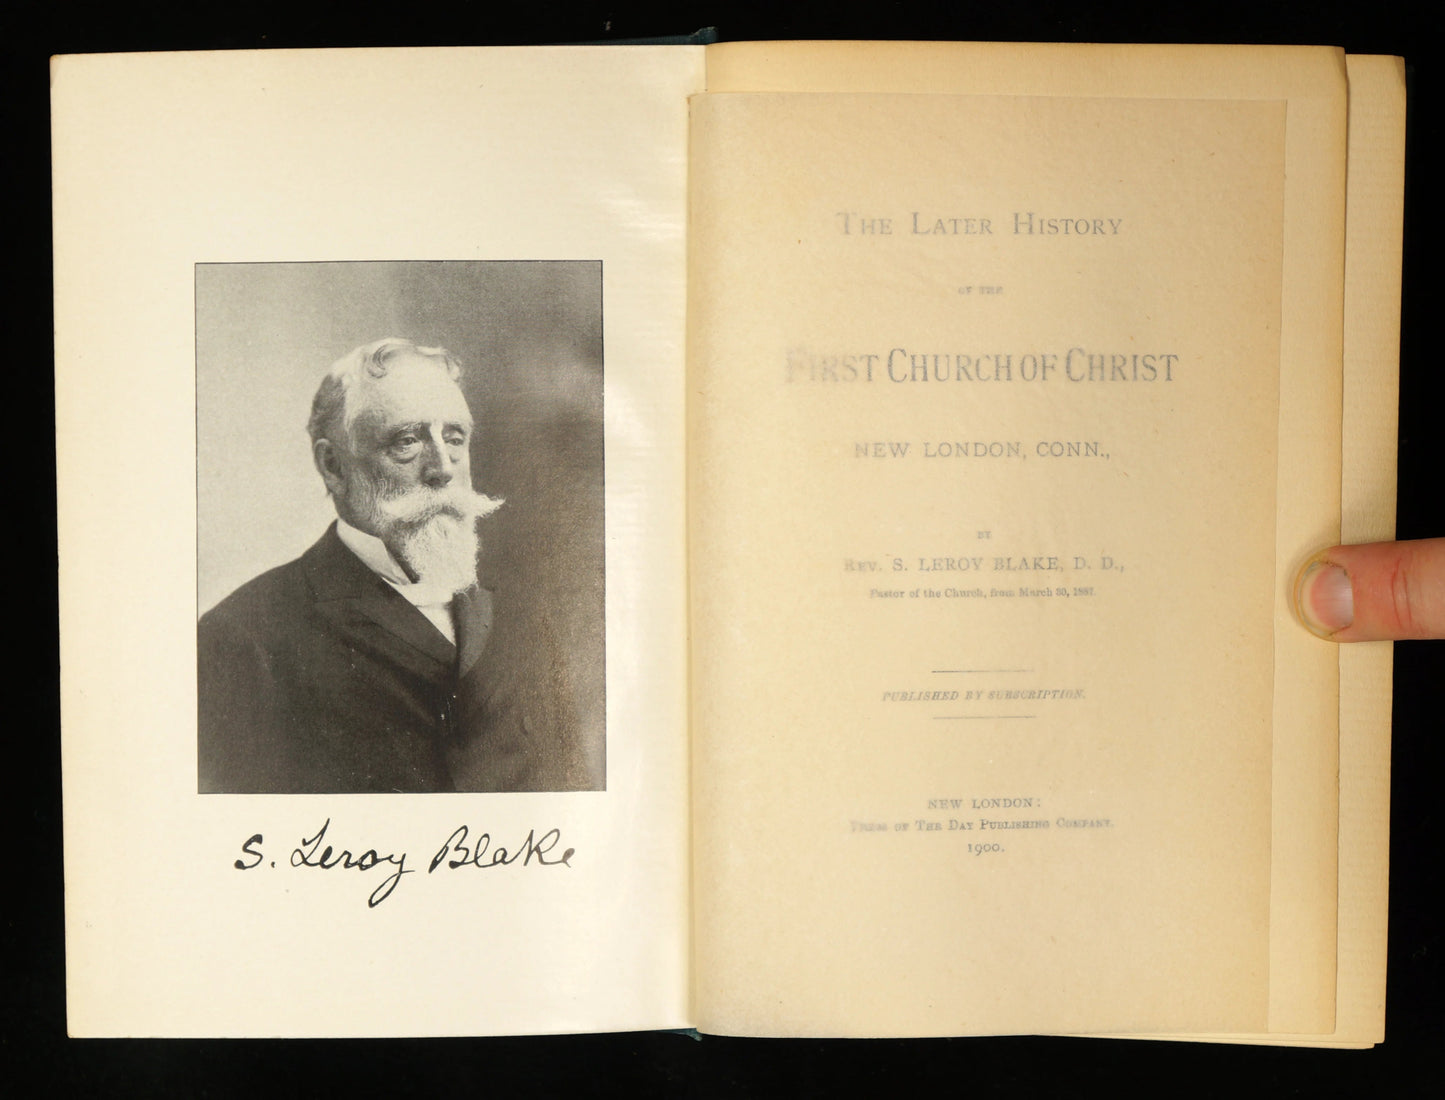 The Later History of the First Church of Christ, New London, Conn 1900 , Blake, Rev. S. Leroy - Bear and Raven Antiques